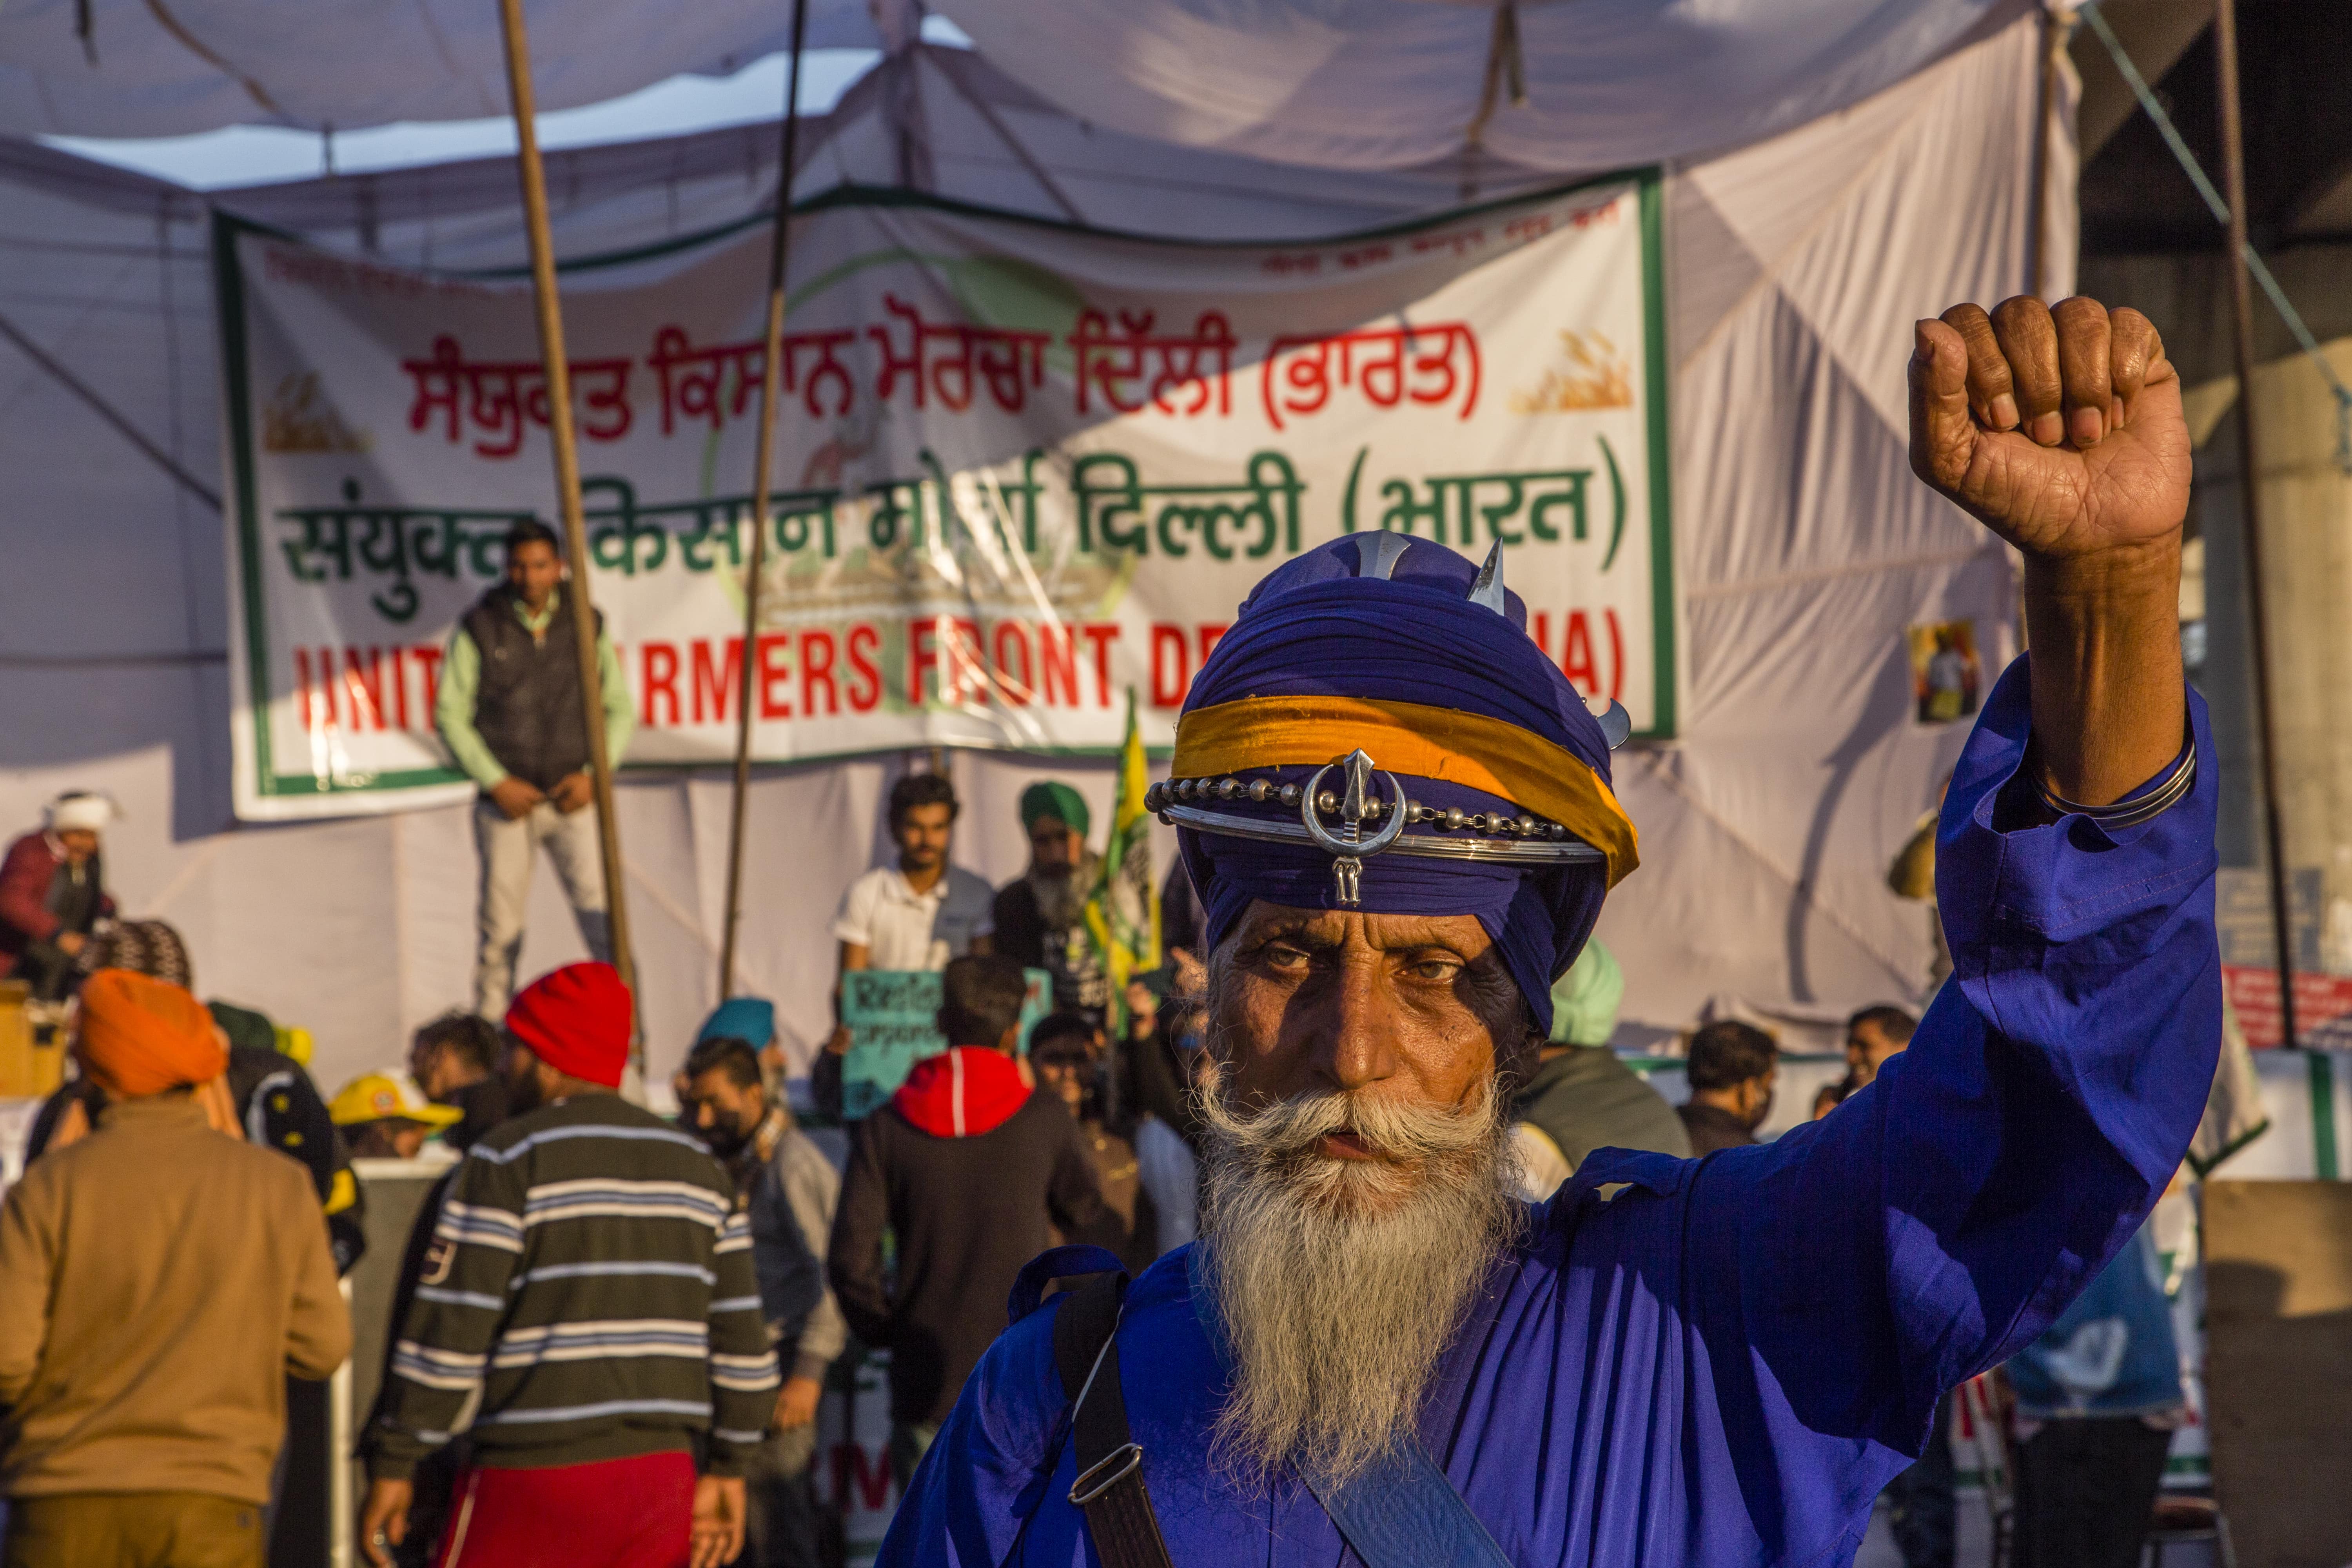 A bearded man dressed all in blue raises up his fist at a political rally for Indian farmers.